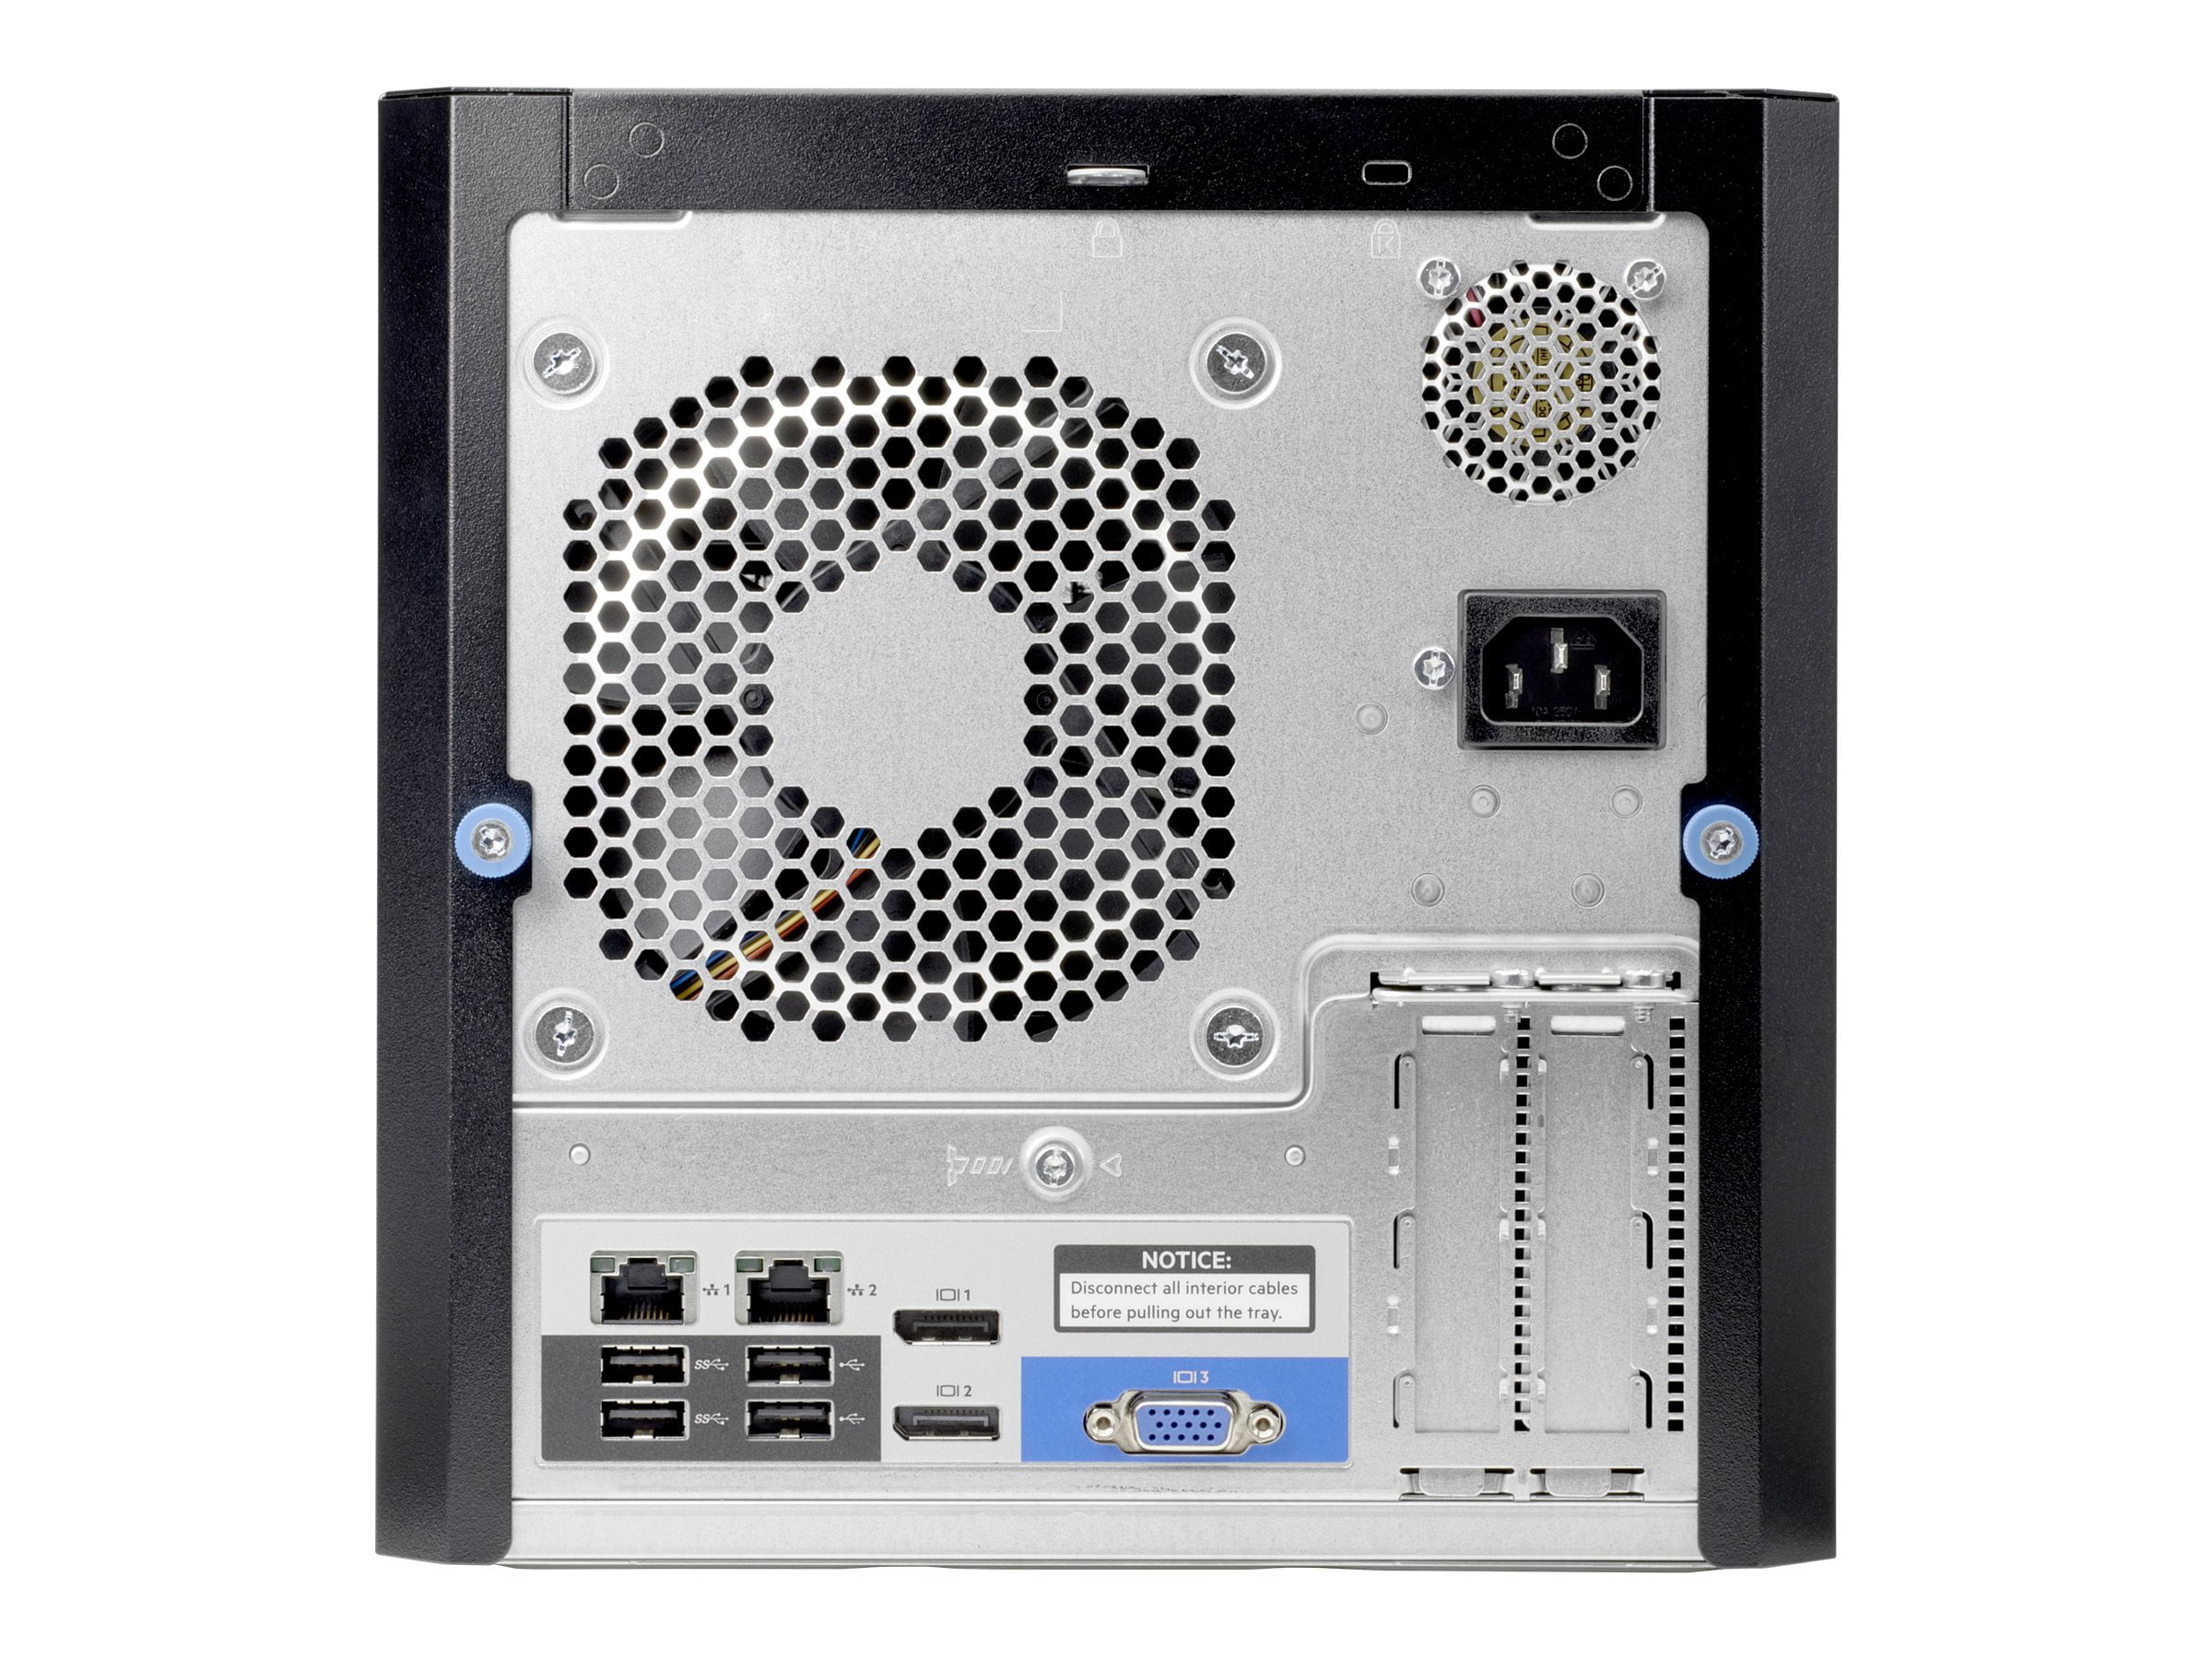 AMD Opteron X3421 up to 3.4GHz 3 Years Warranty 8GB RAM RAID 2TB SATA HP MicroServer Gen10 Tower Server for Business 